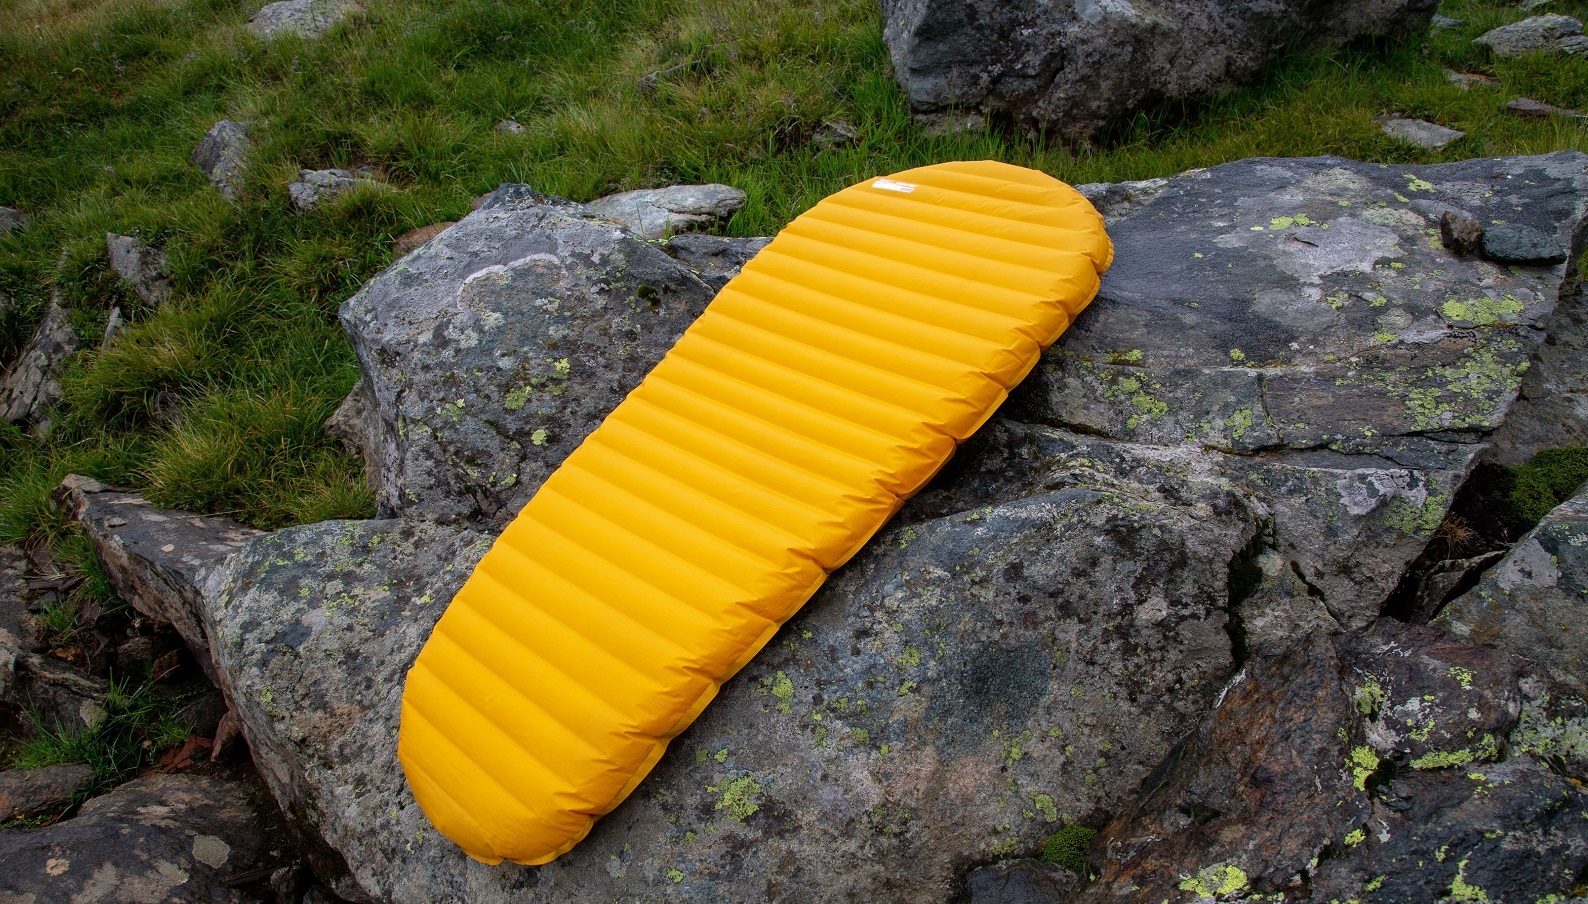 Thermarest NeoAir XLite review: Is It Worth The Money